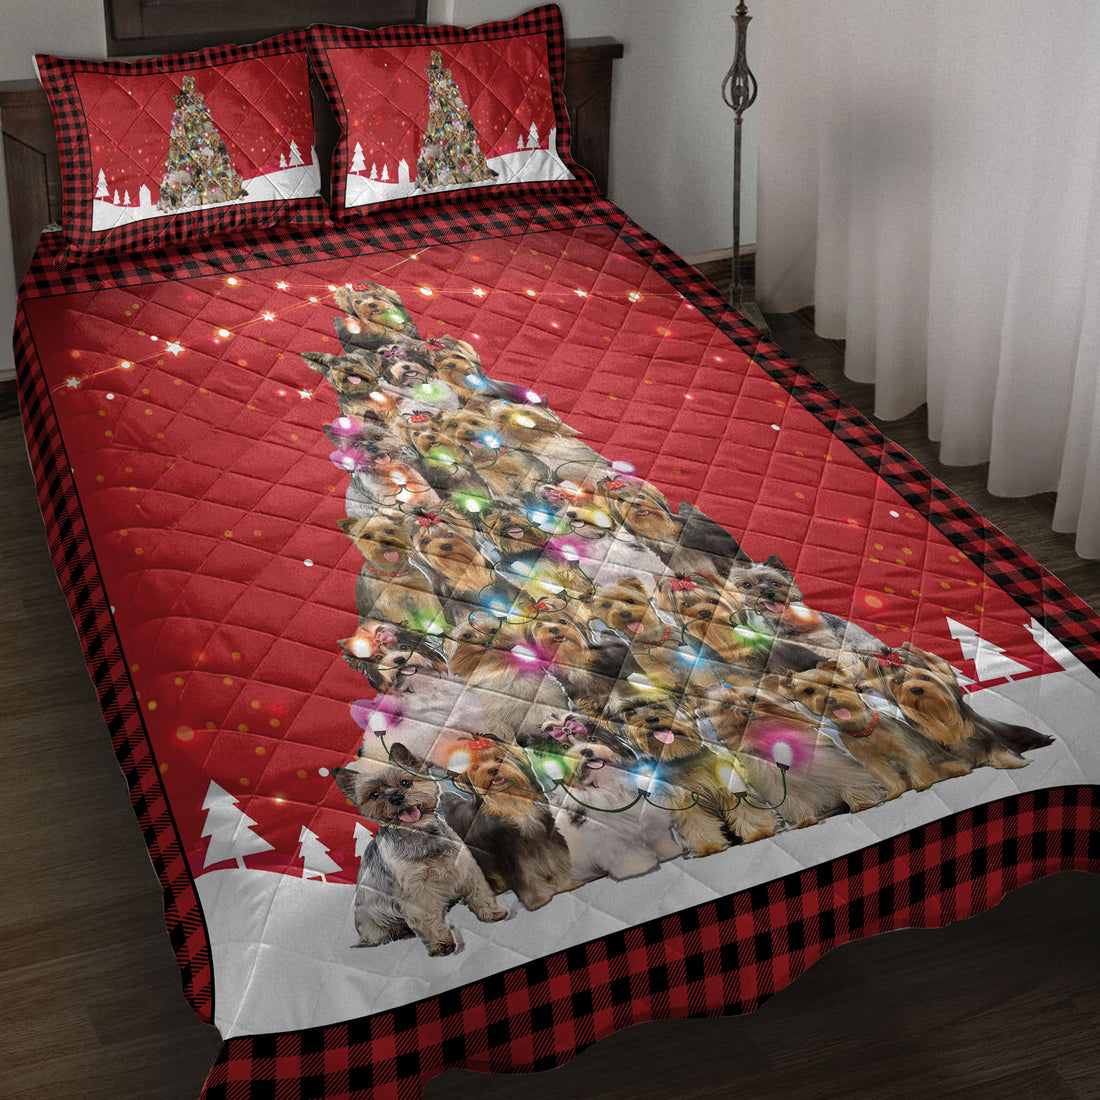 Ohaprints-Quilt-Bed-Set-Pillowcase-Yorkshire-Terrier-Christmas-Noel-Xmas-Tree-Dog-Lover-Blanket-Bedspread-Bedding-3826-Throw (55'' x 60'')